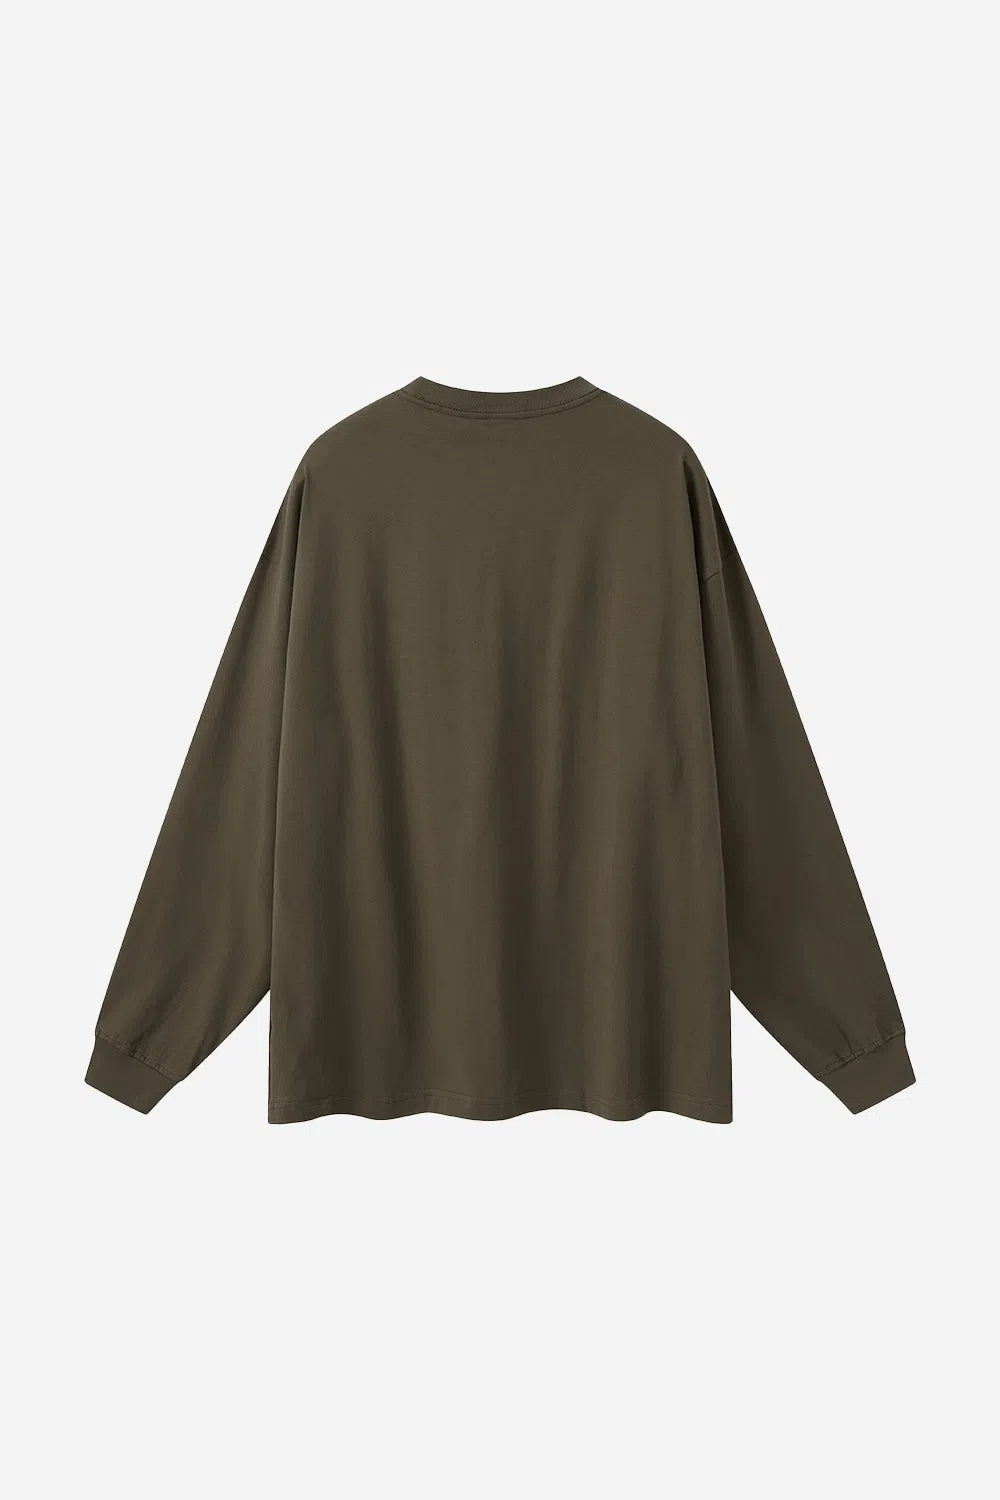 Long Sleeve Oversized T-Shirt 100% Cotton - COFFEE-LOTABY